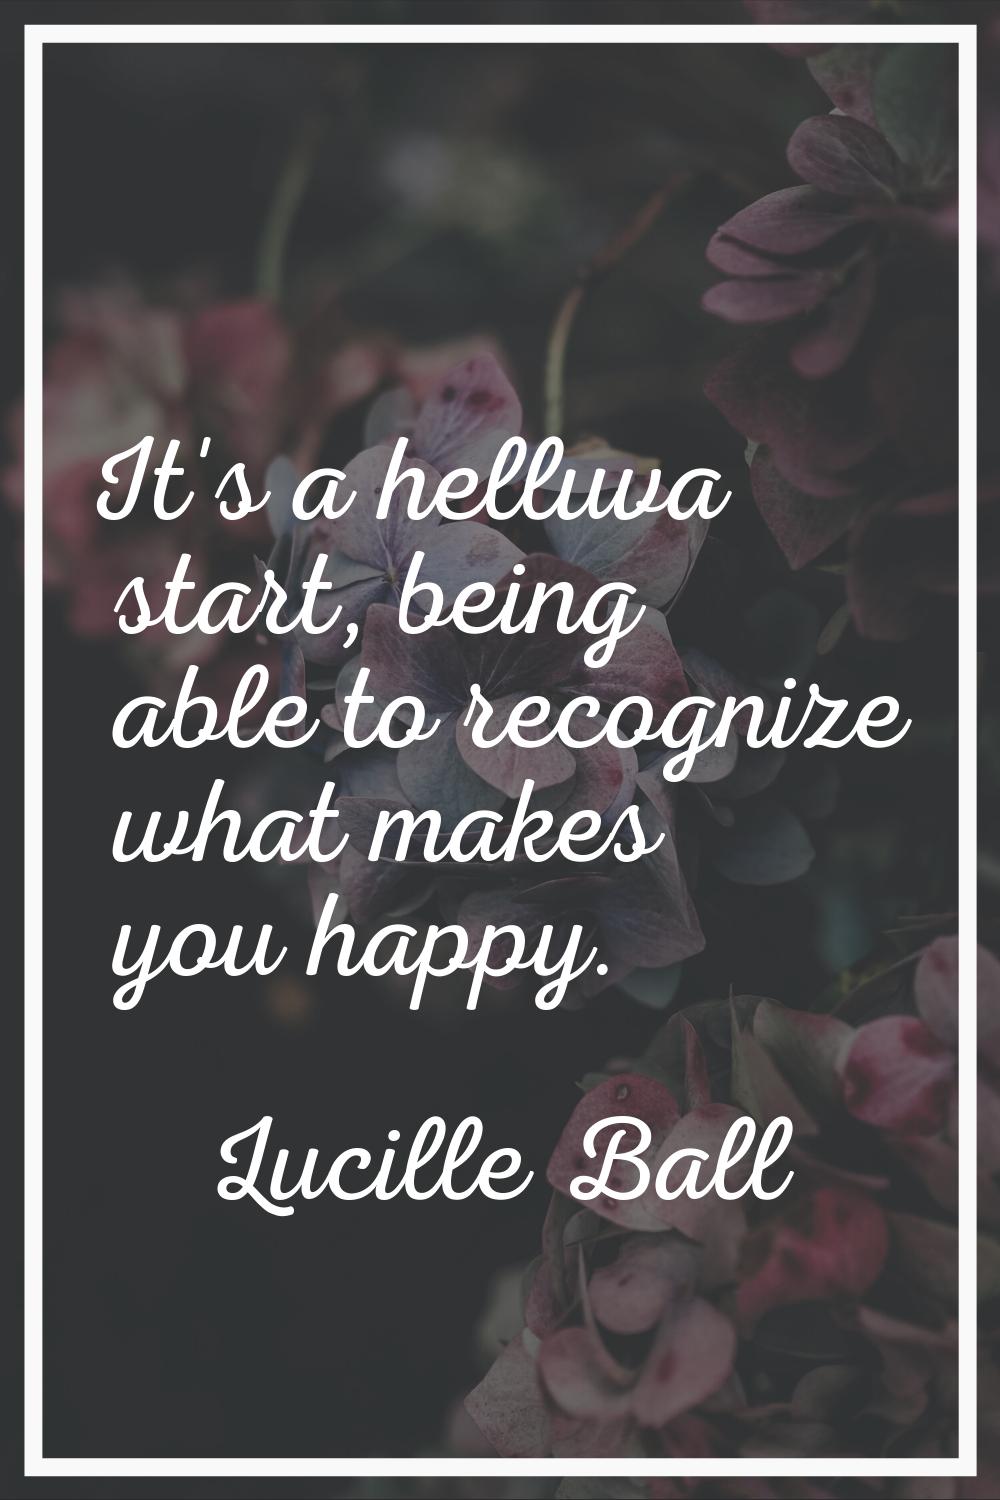 It's a helluva start, being able to recognize what makes you happy.